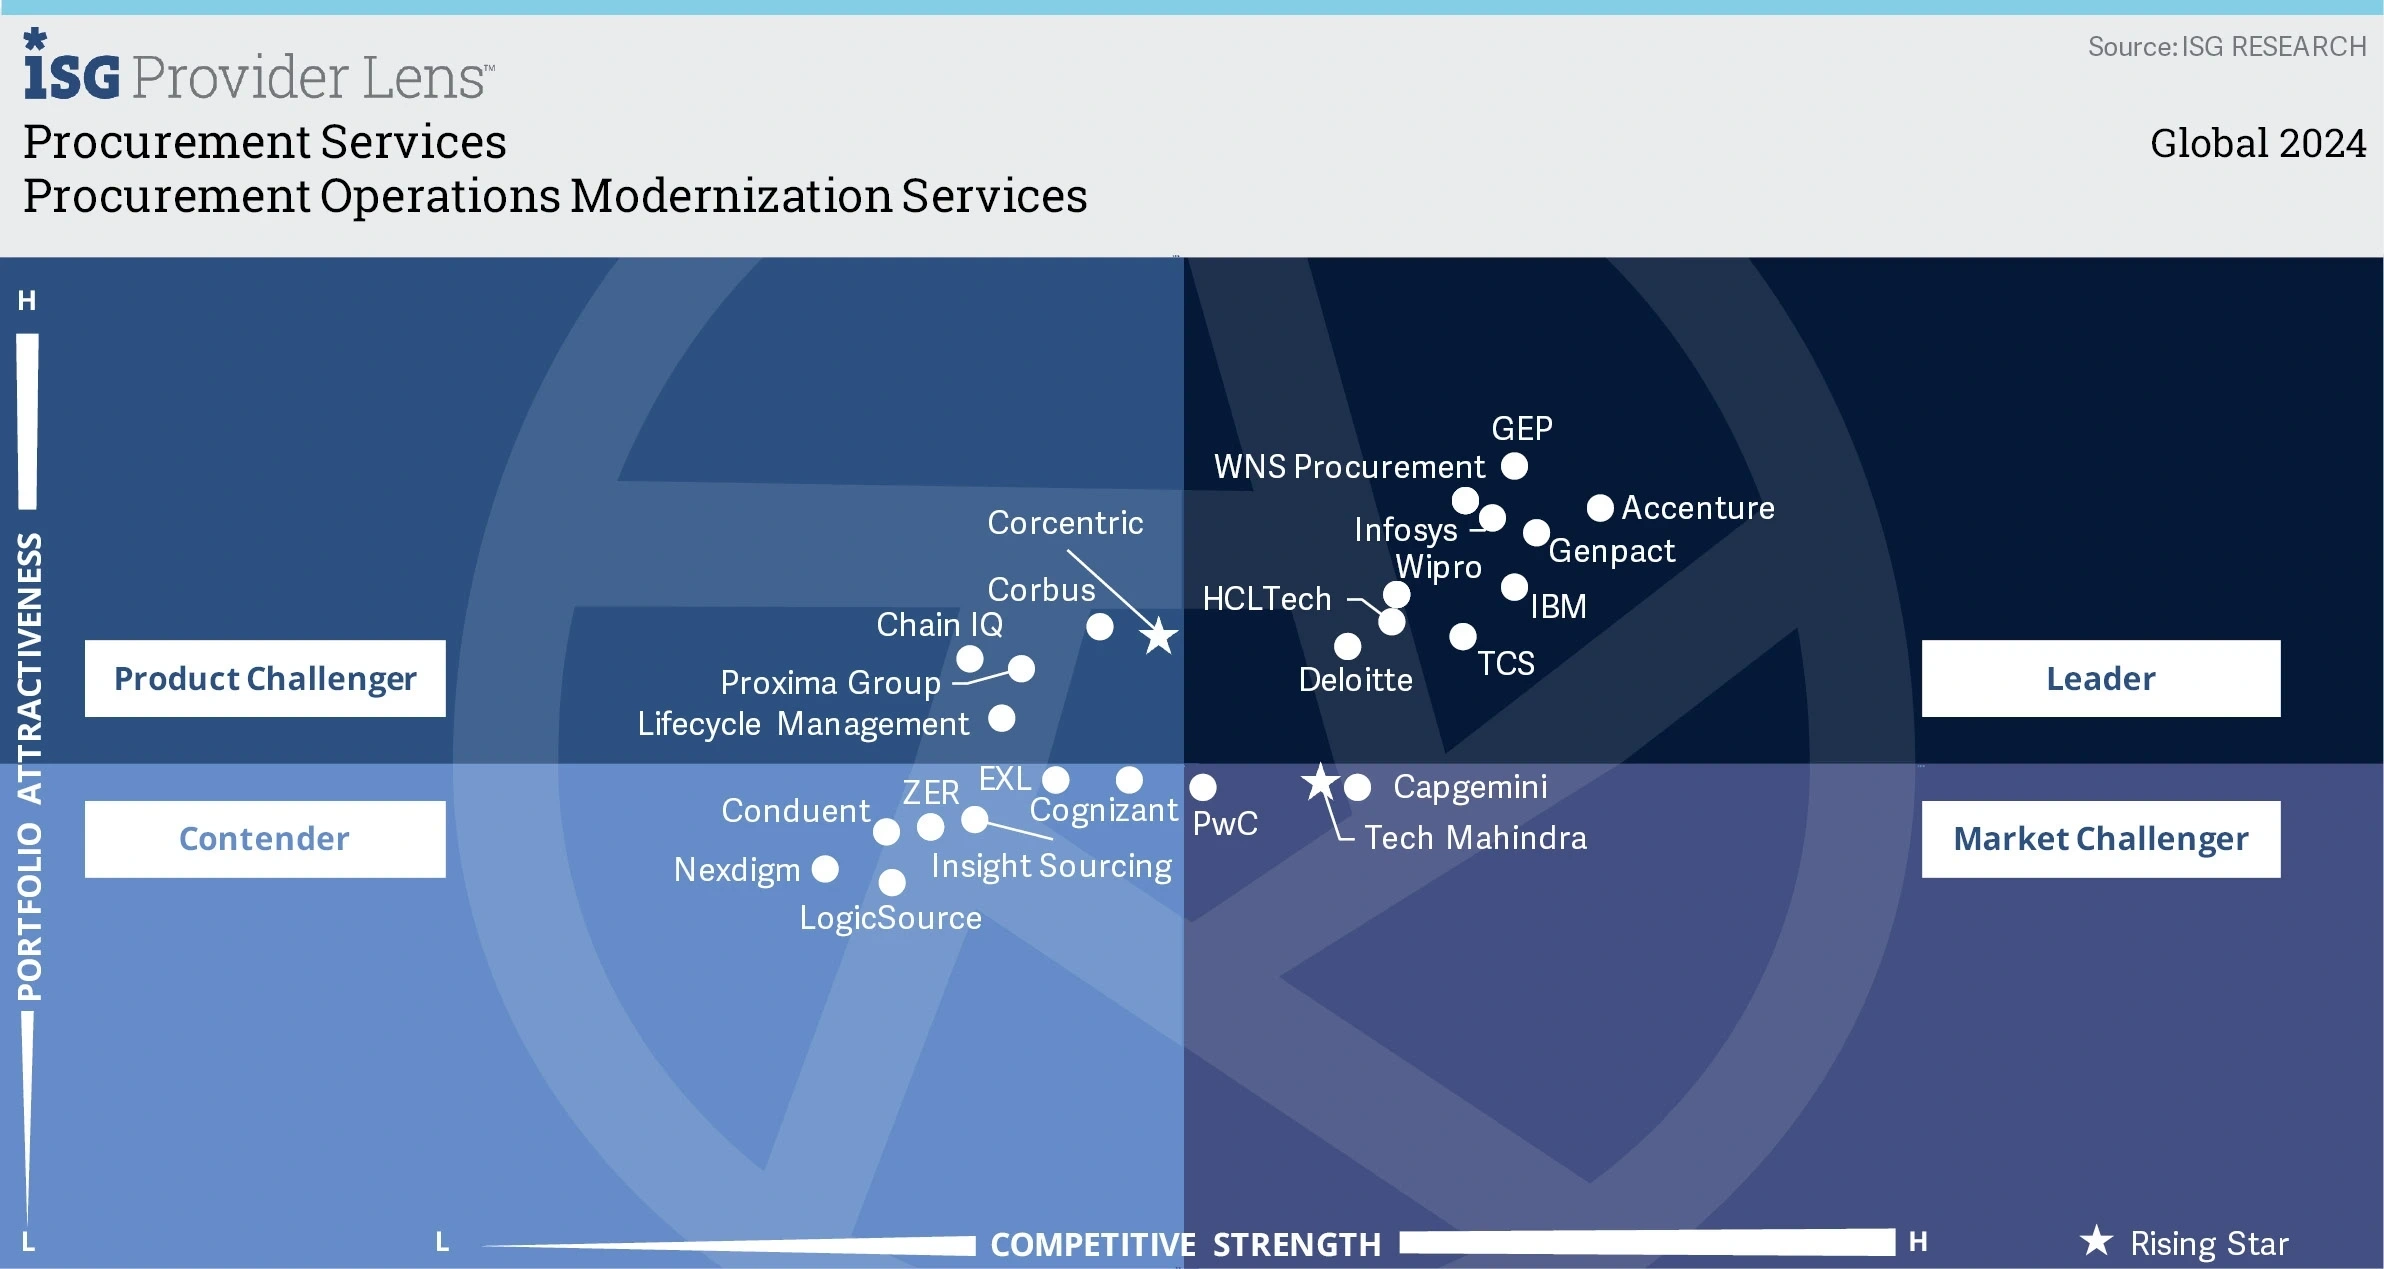 HCLTech positioned as a Leader in ISG Provider Lens™ Procurement Services - Procurement Operations Modernization Services, 2024